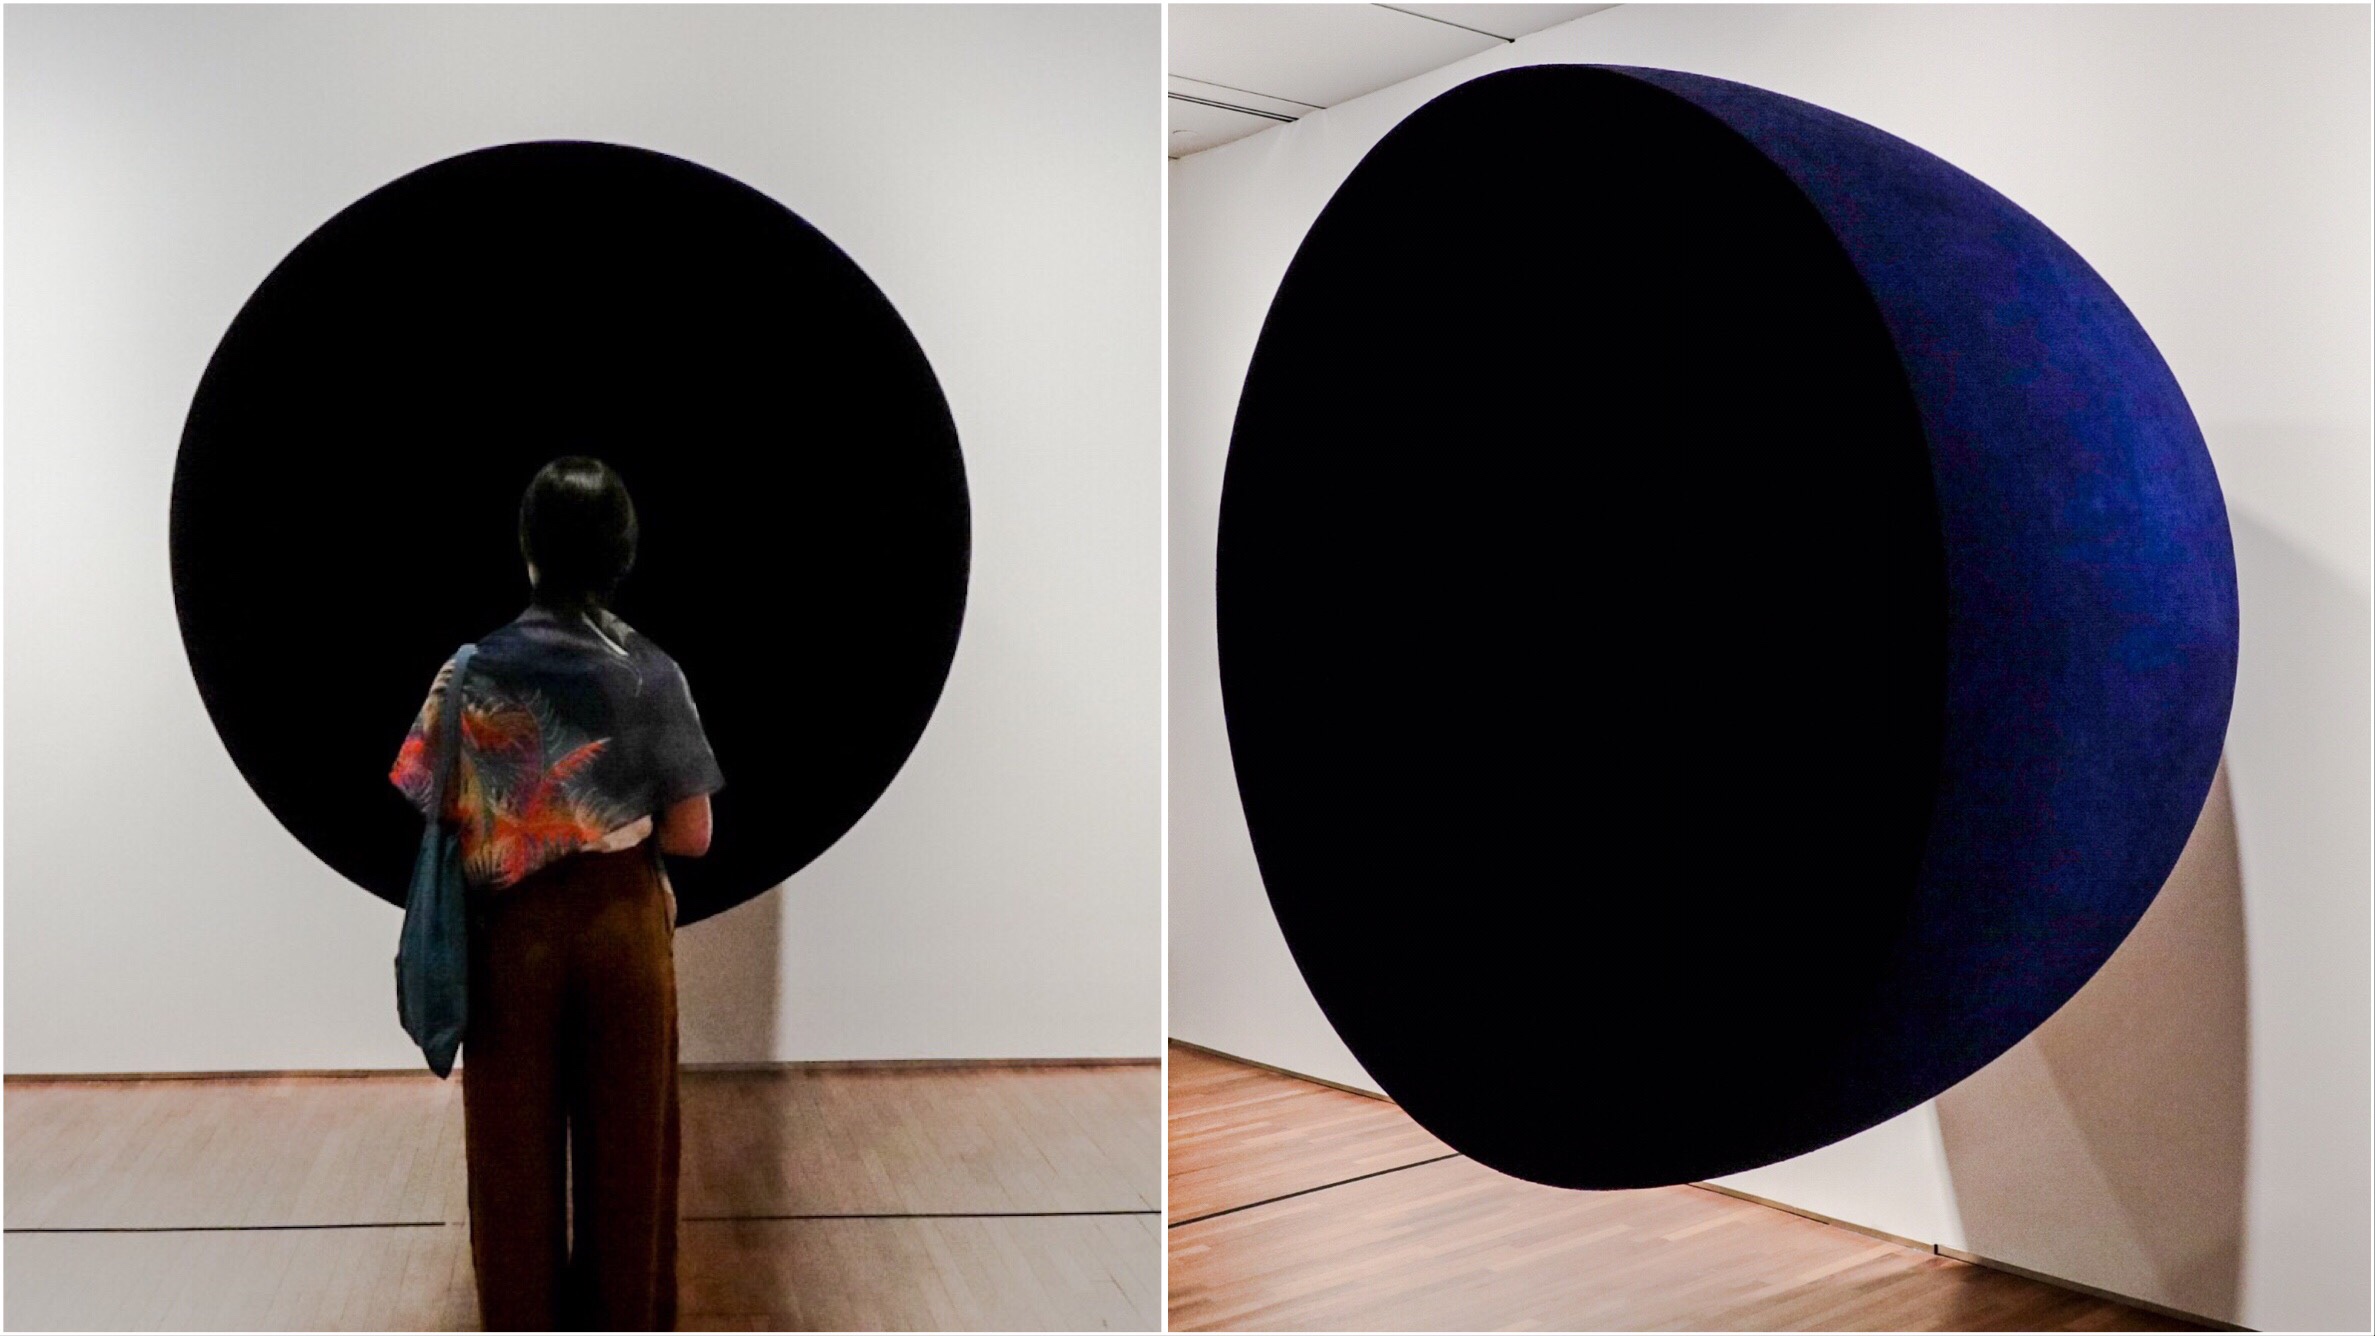 Void by Anish Kapoor at the National Gallery Singapore.